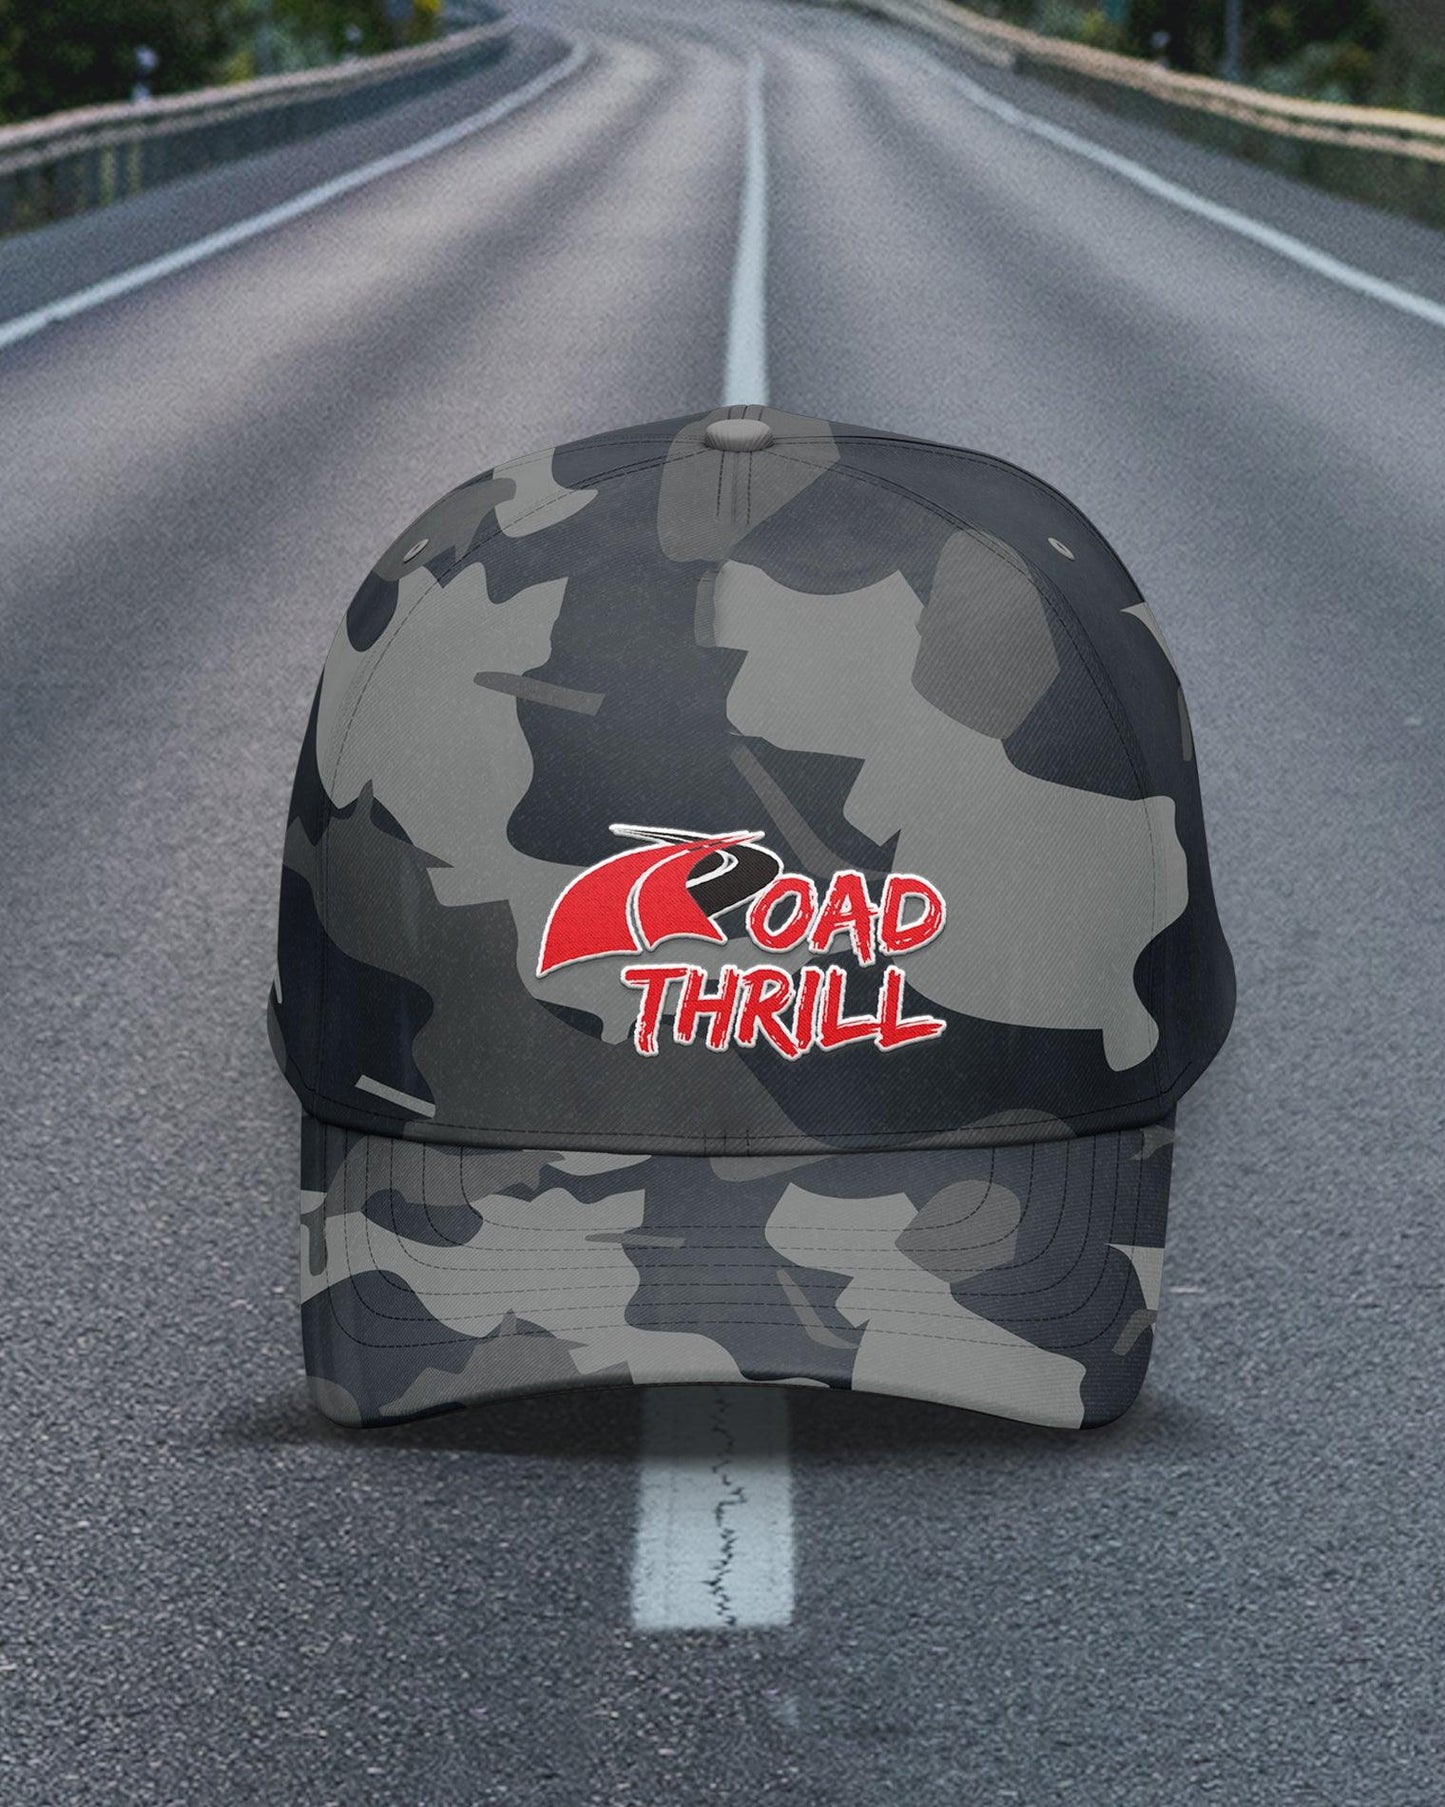 Road Thrill - Freedom to Ride - TagMyTee - 